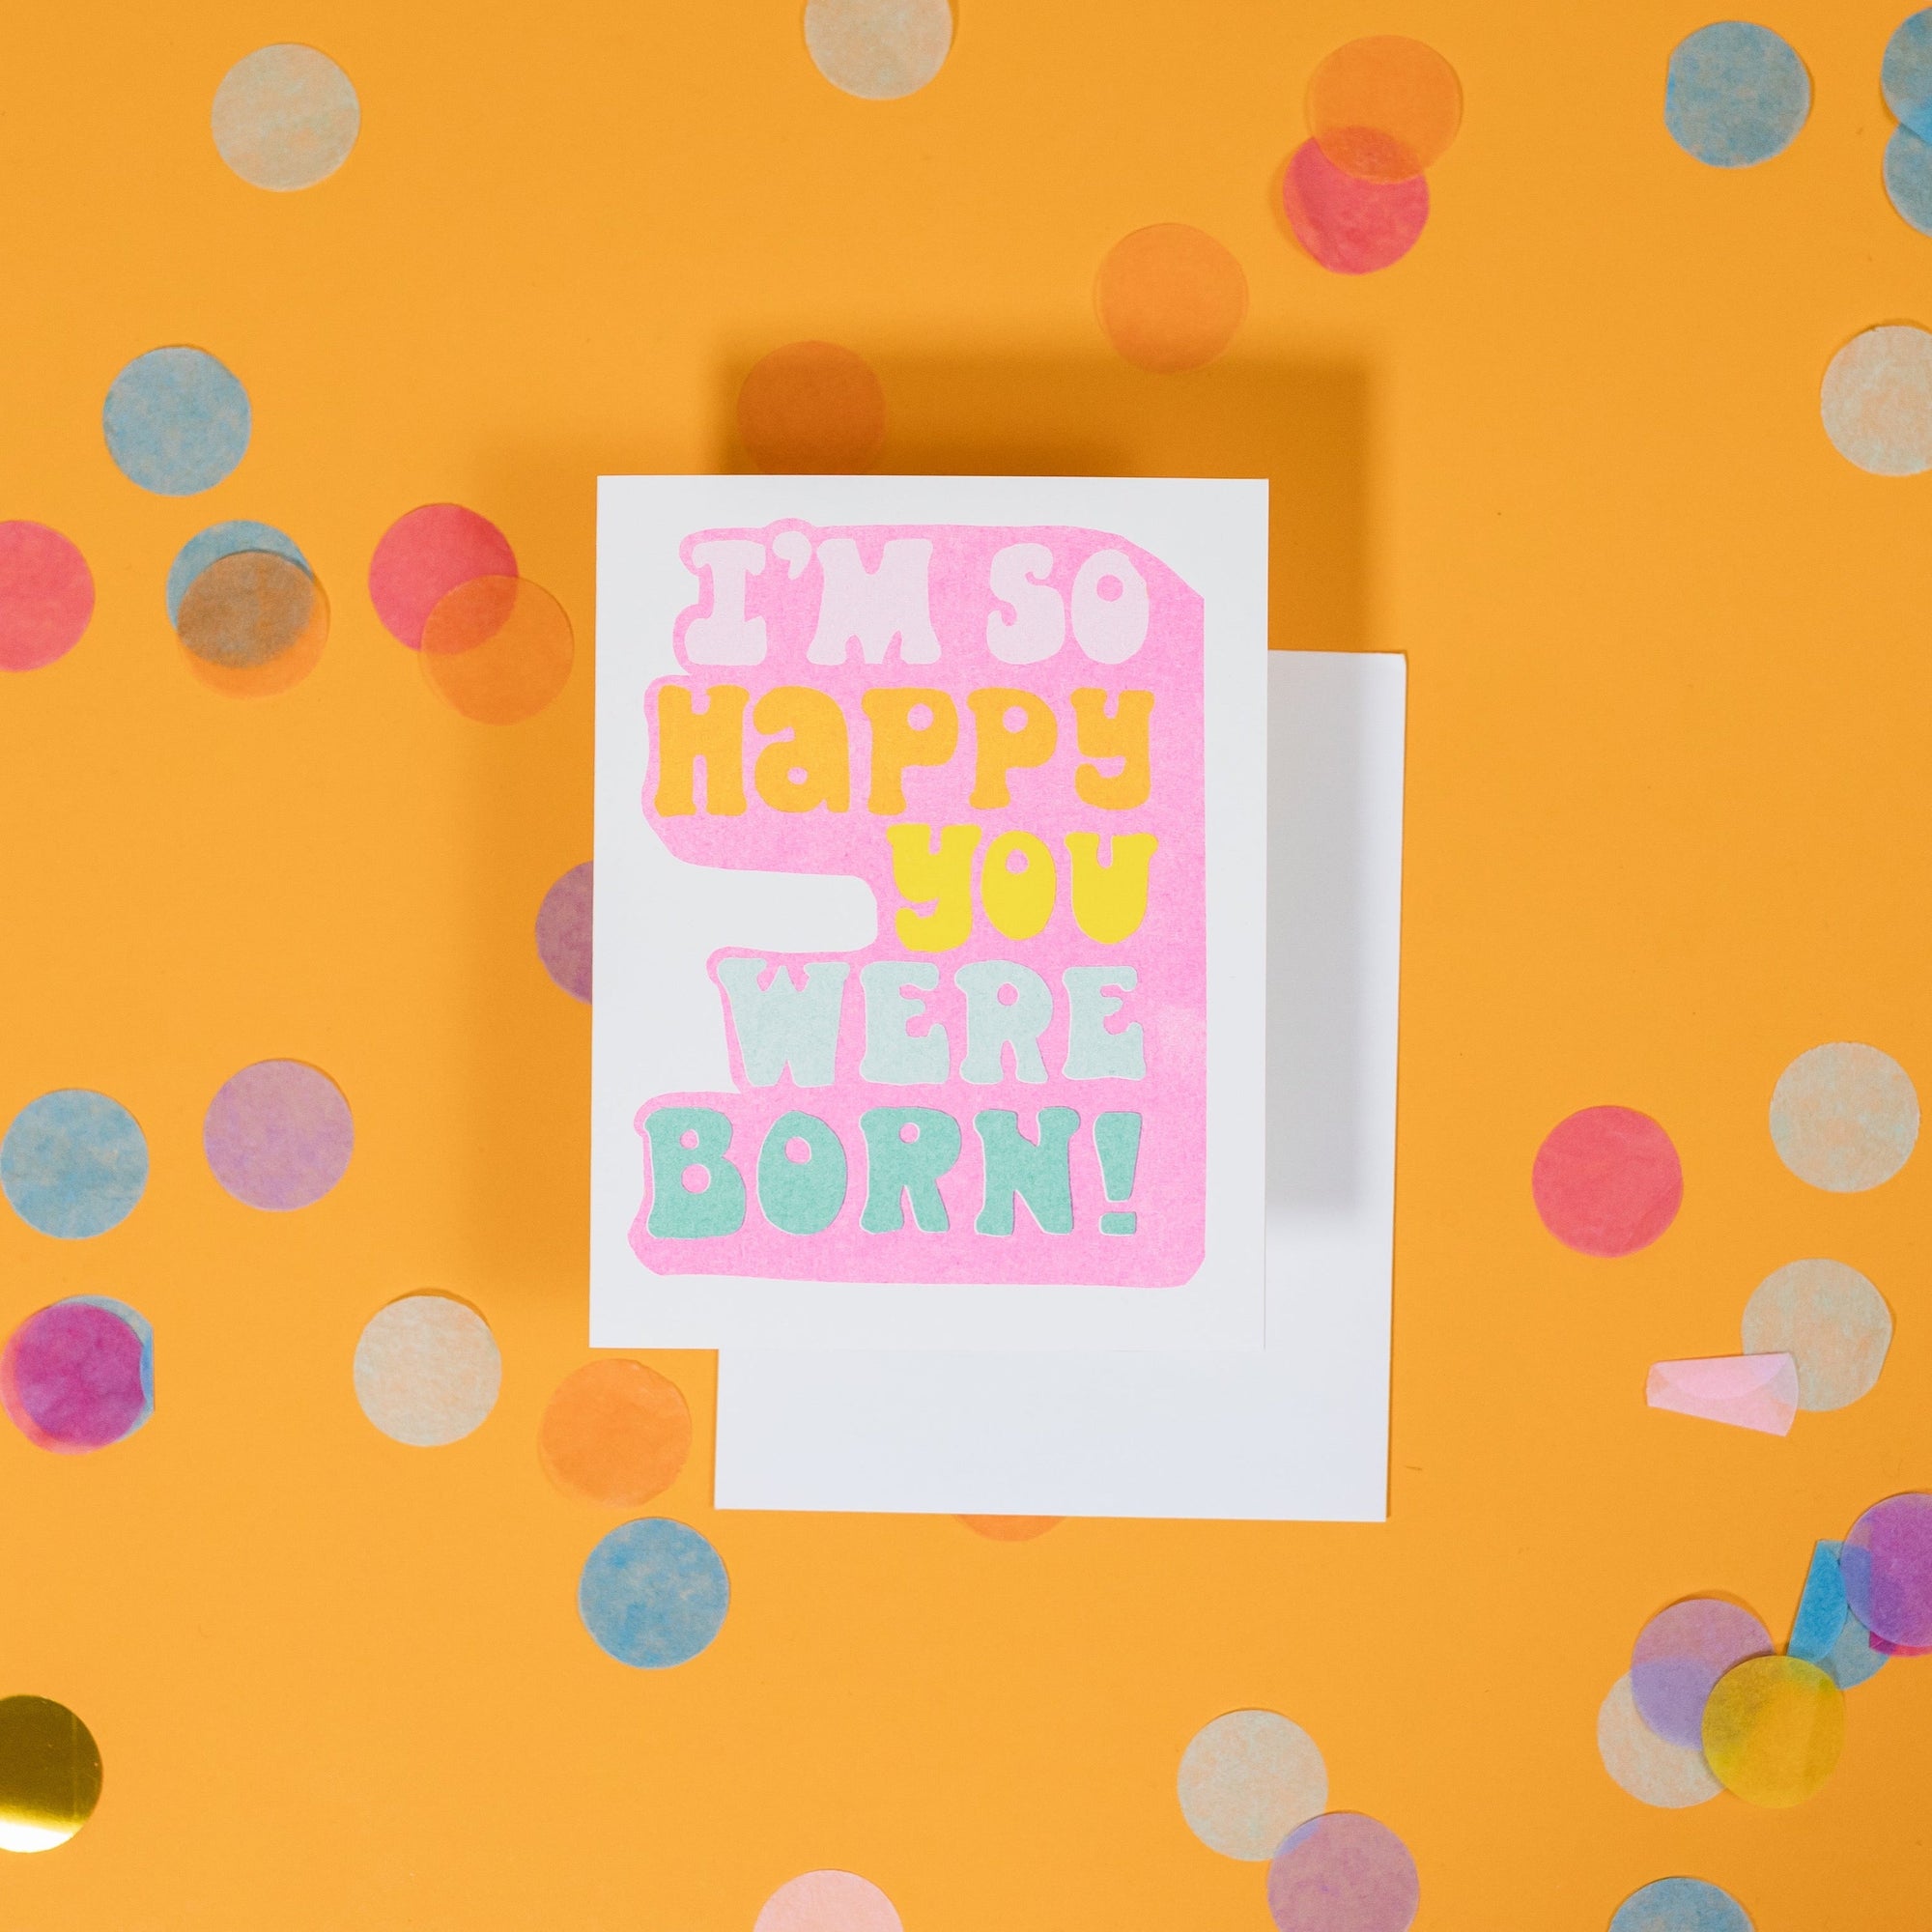 On a sunny mustard background is a greeting card and envelope with big, colorful confetti scattered around. The white greeting card says "I'M SO HAPPY YOU WERE BORN!" in handwritten funky lettering in white, orange, yellow, cool aqua, turquoise with pink underneath. The white envelope sits under the card. 